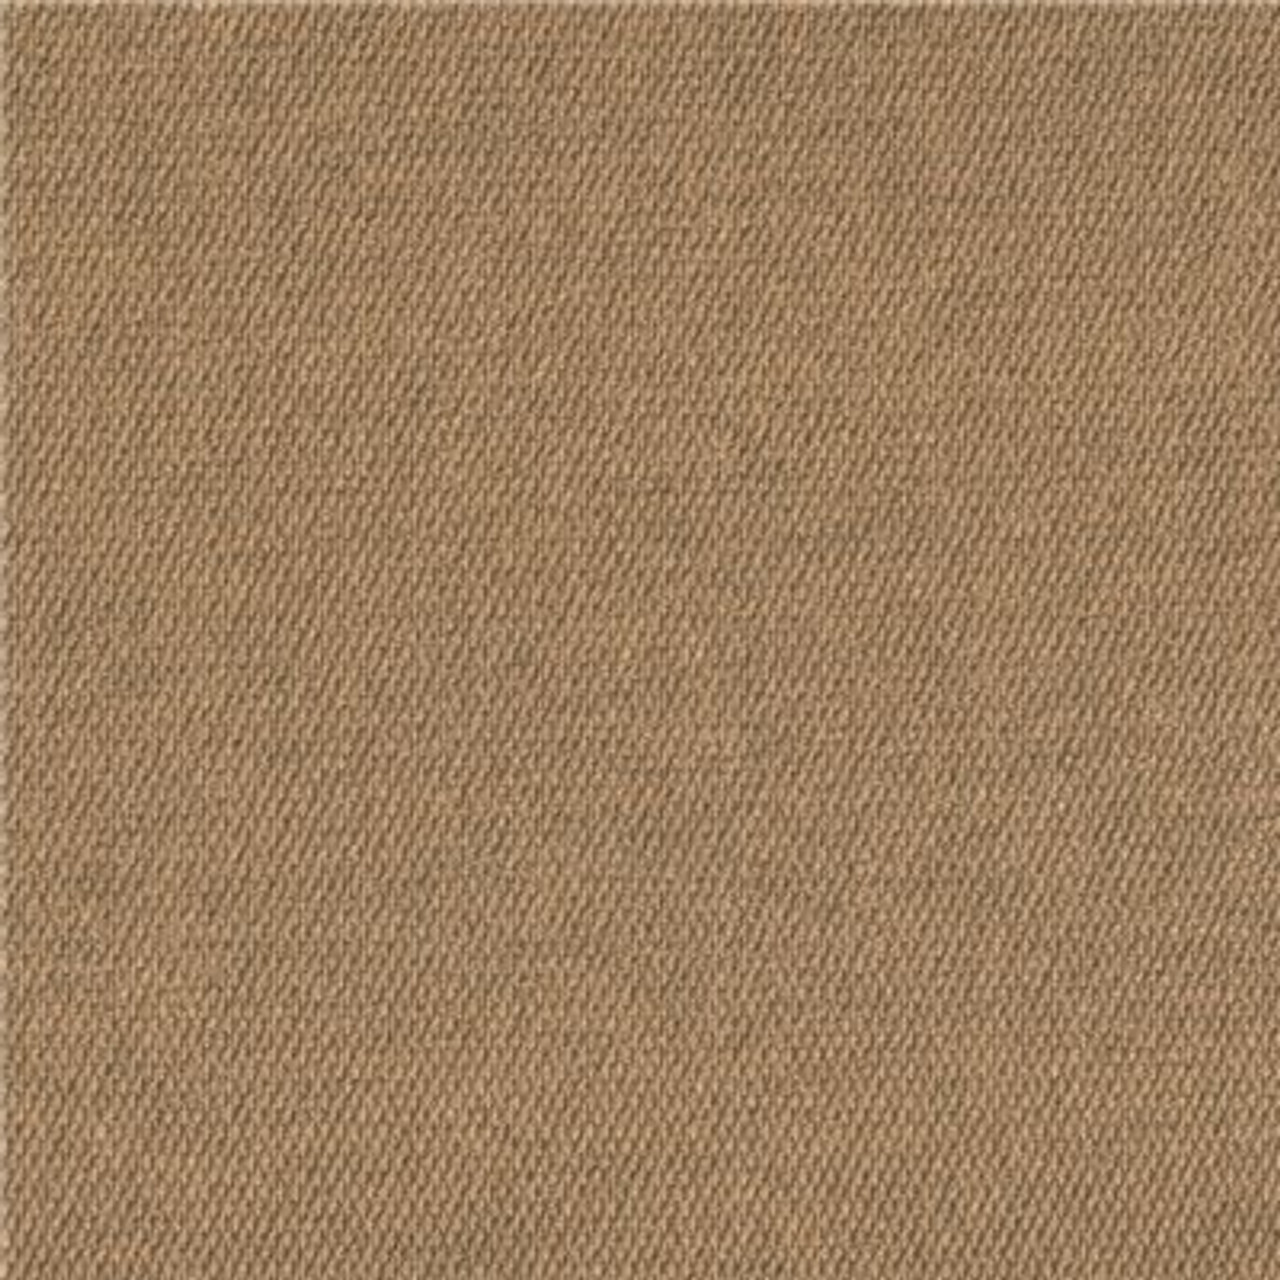 Foss Peel And Stick First Impressions Chestnut Hobnail Texture 24 In. X 24 In. Commercial Carpet Tile (15 Tiles/Case)